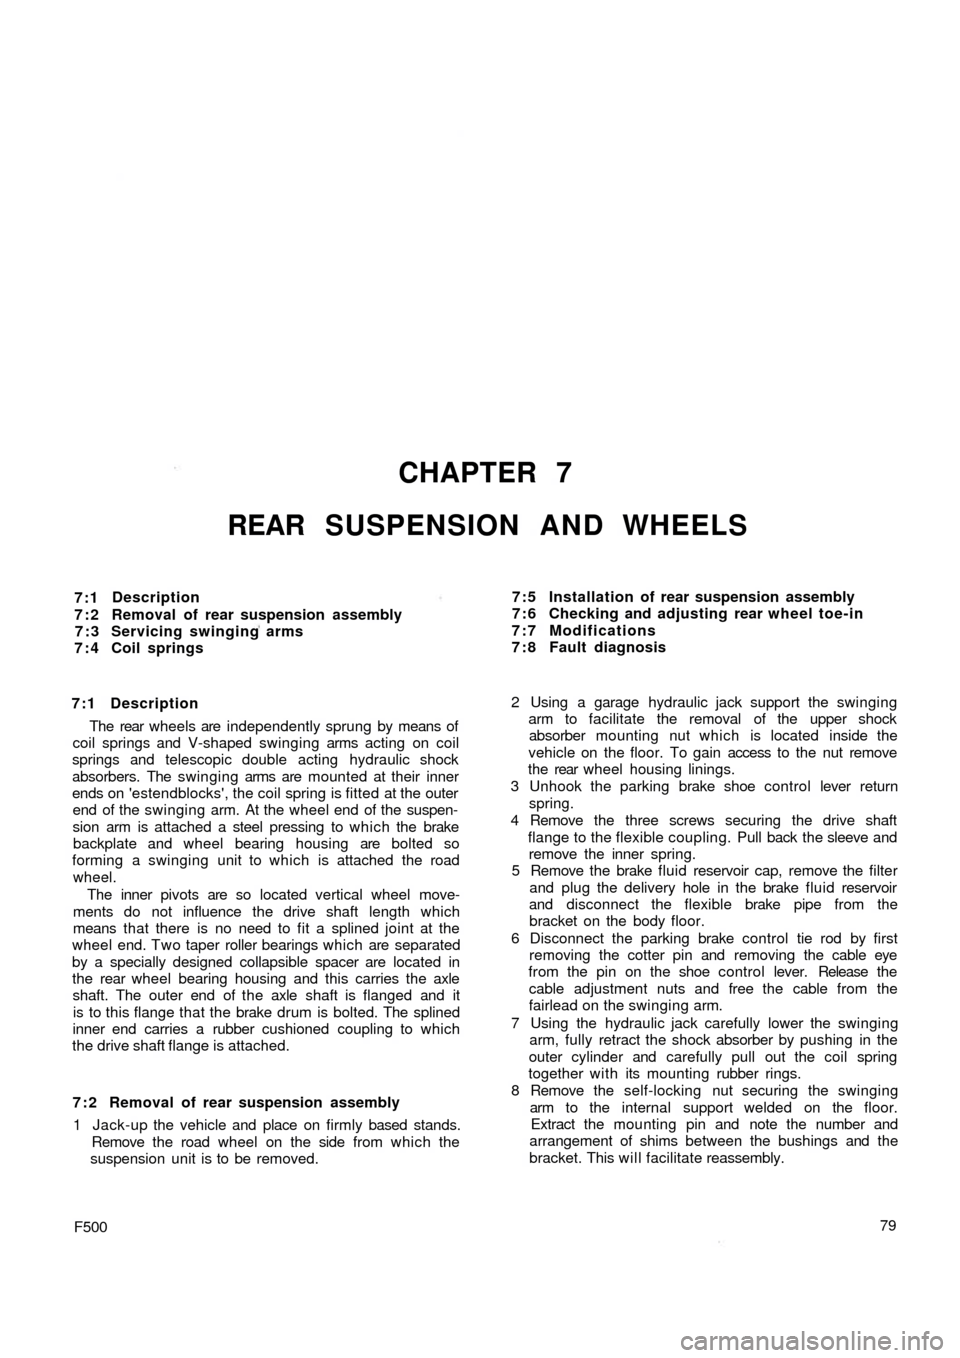 FIAT 500 1969 1.G Workshop Manual CHAPTER 7
REAR SUSPENSION AND WHEELS
7:1
7:2
7:3
7:4Description
Removal of rear suspension assembly
Servicing swinging arms
Coil springs
7:1 Description
The  rear  wheels are independently sprung by m